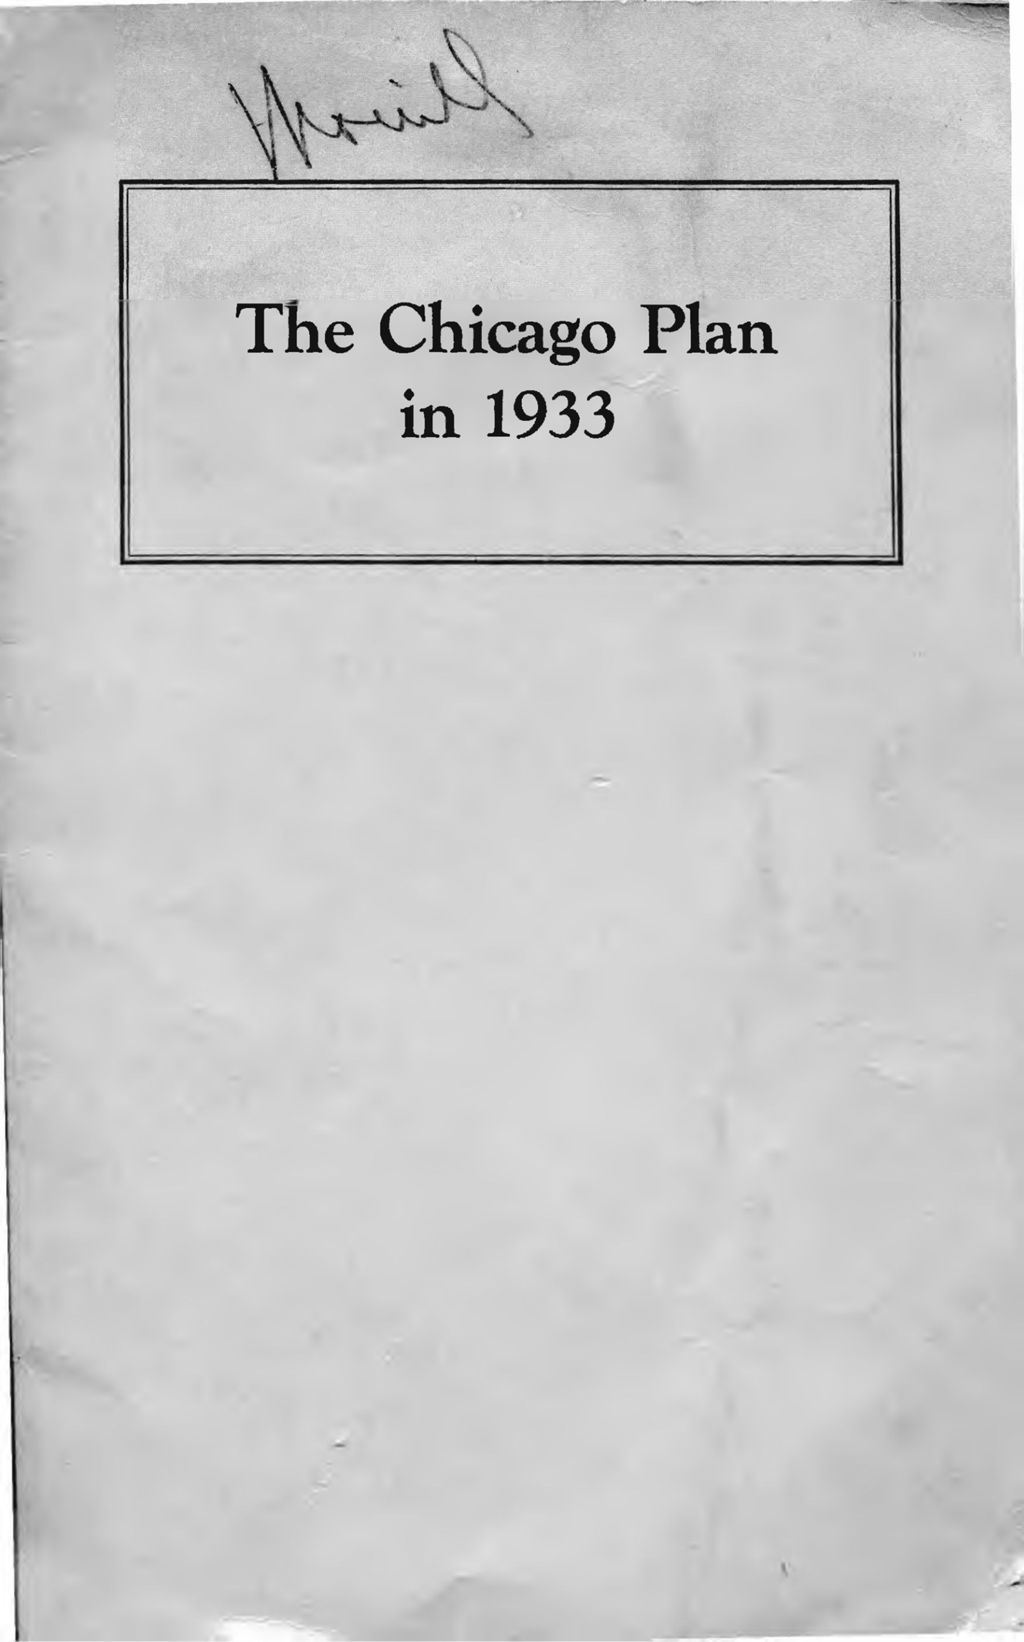 The Chicago Plan, 1933